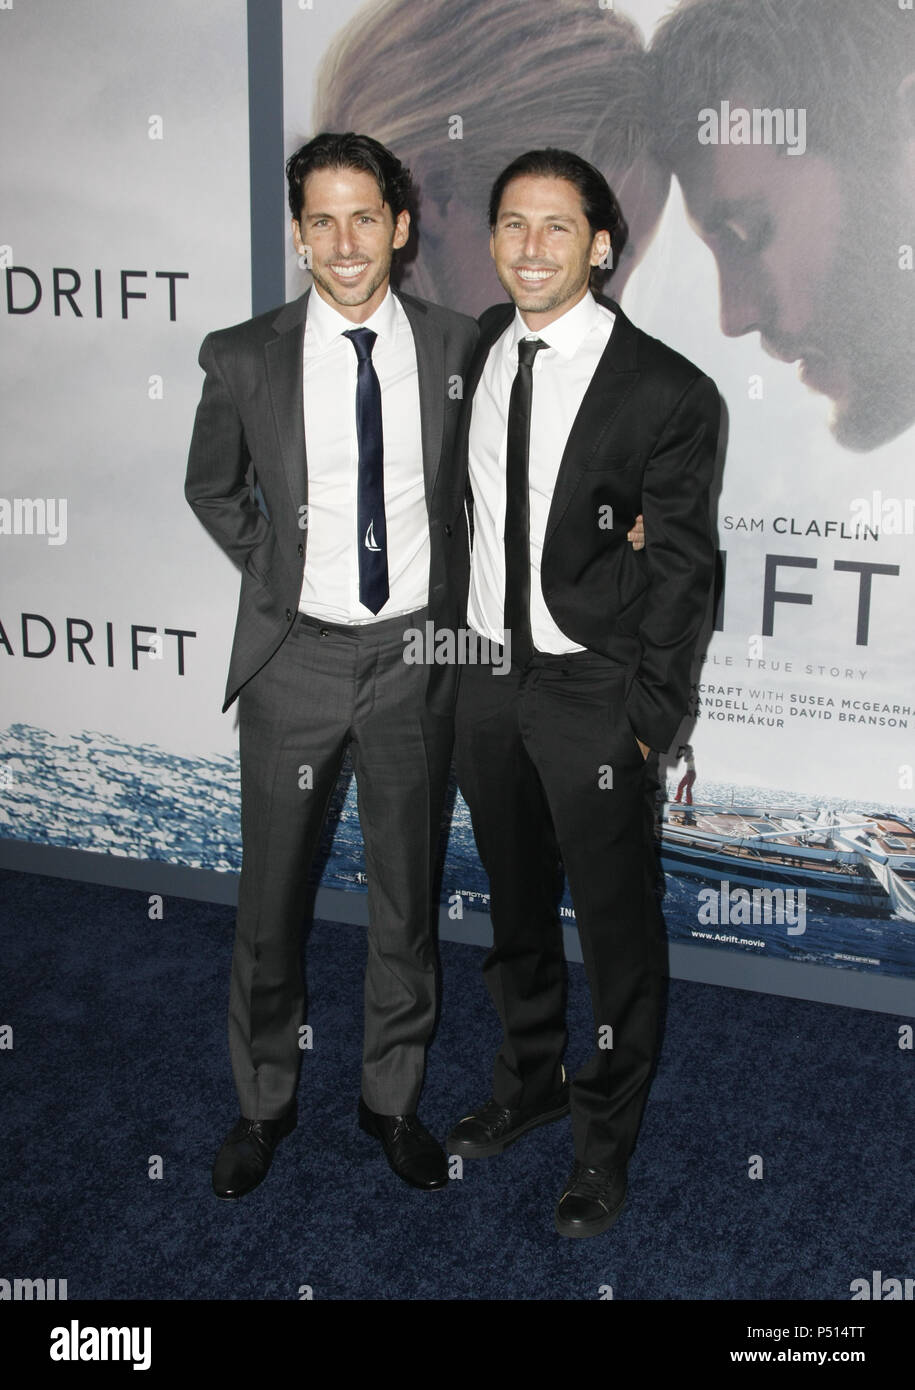 Premiere Of STX Films' 'Adrift'  Featuring: Aaron Kandell, Jordan Kandell Where: Los Angeles, California, United States When: 23 May 2018 Credit: FayesVision/WENN.com Stock Photo